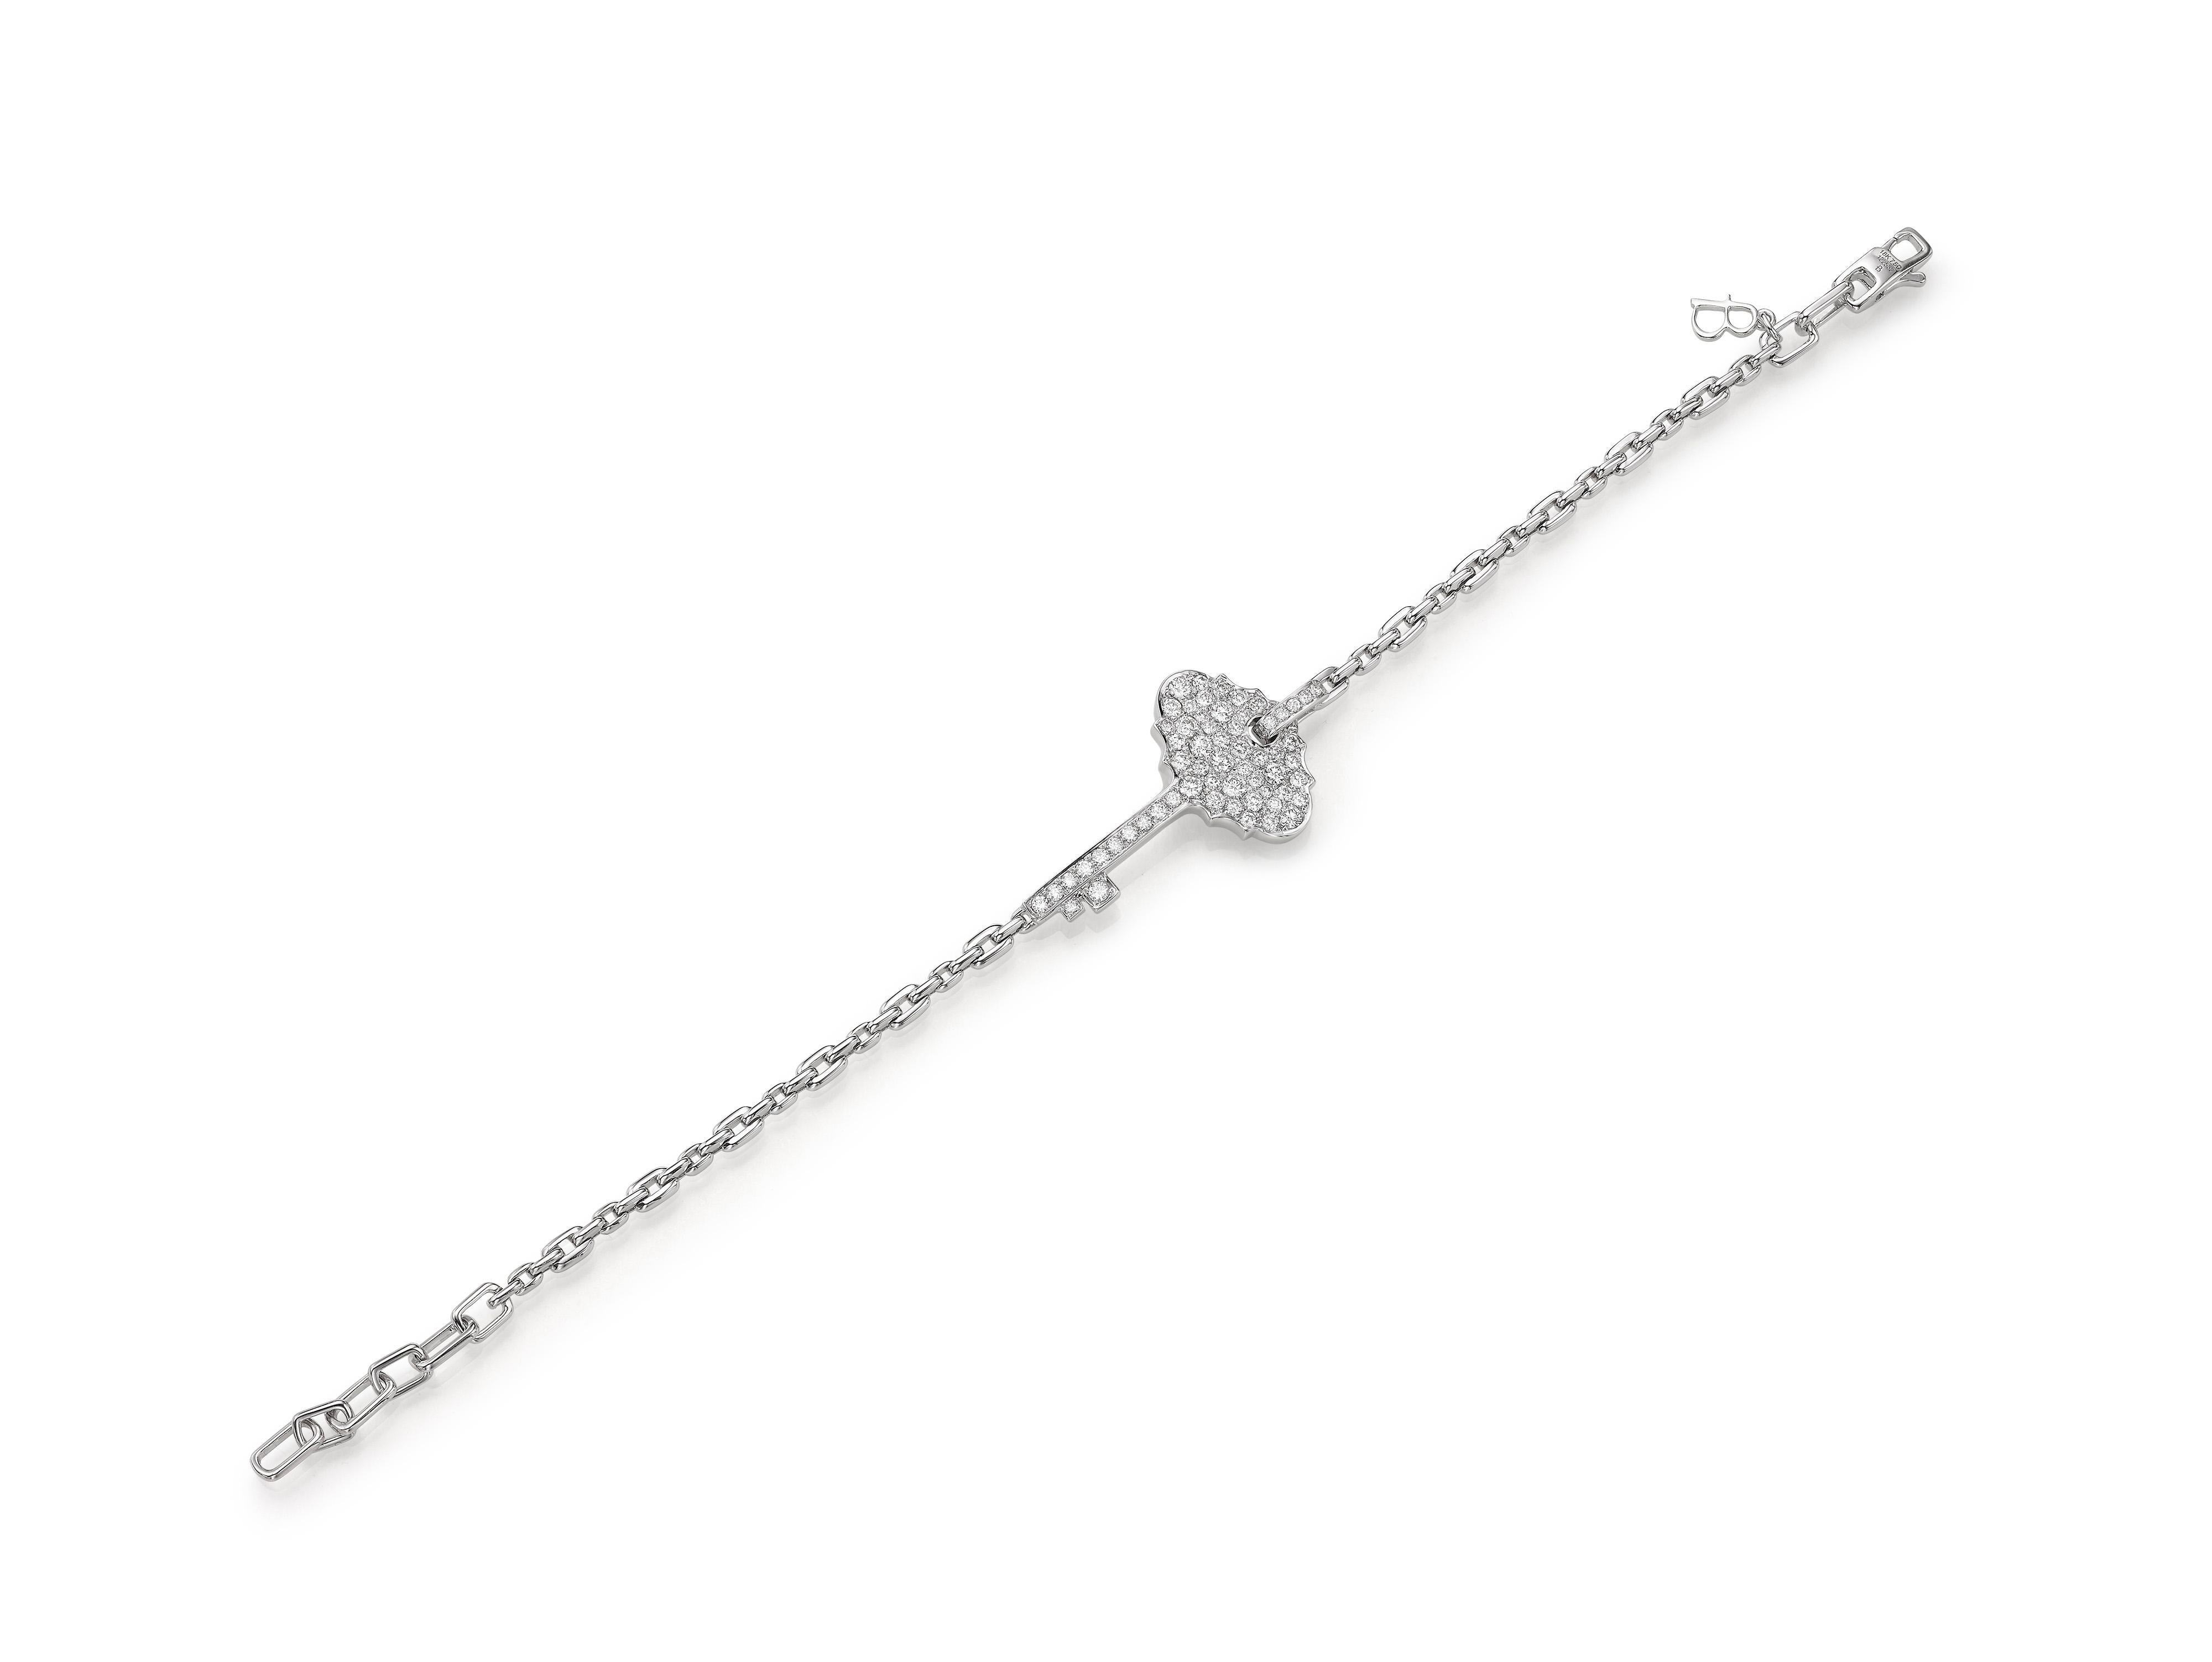 A simple, stackable bracelet that is perfect for every day.  Butani’s 18K white gold bracelet is strung with a key pendant and encrusted with diamonds totaling 0.89 carats.  Adjustable to your preferred length.  Also available in yellow gold and